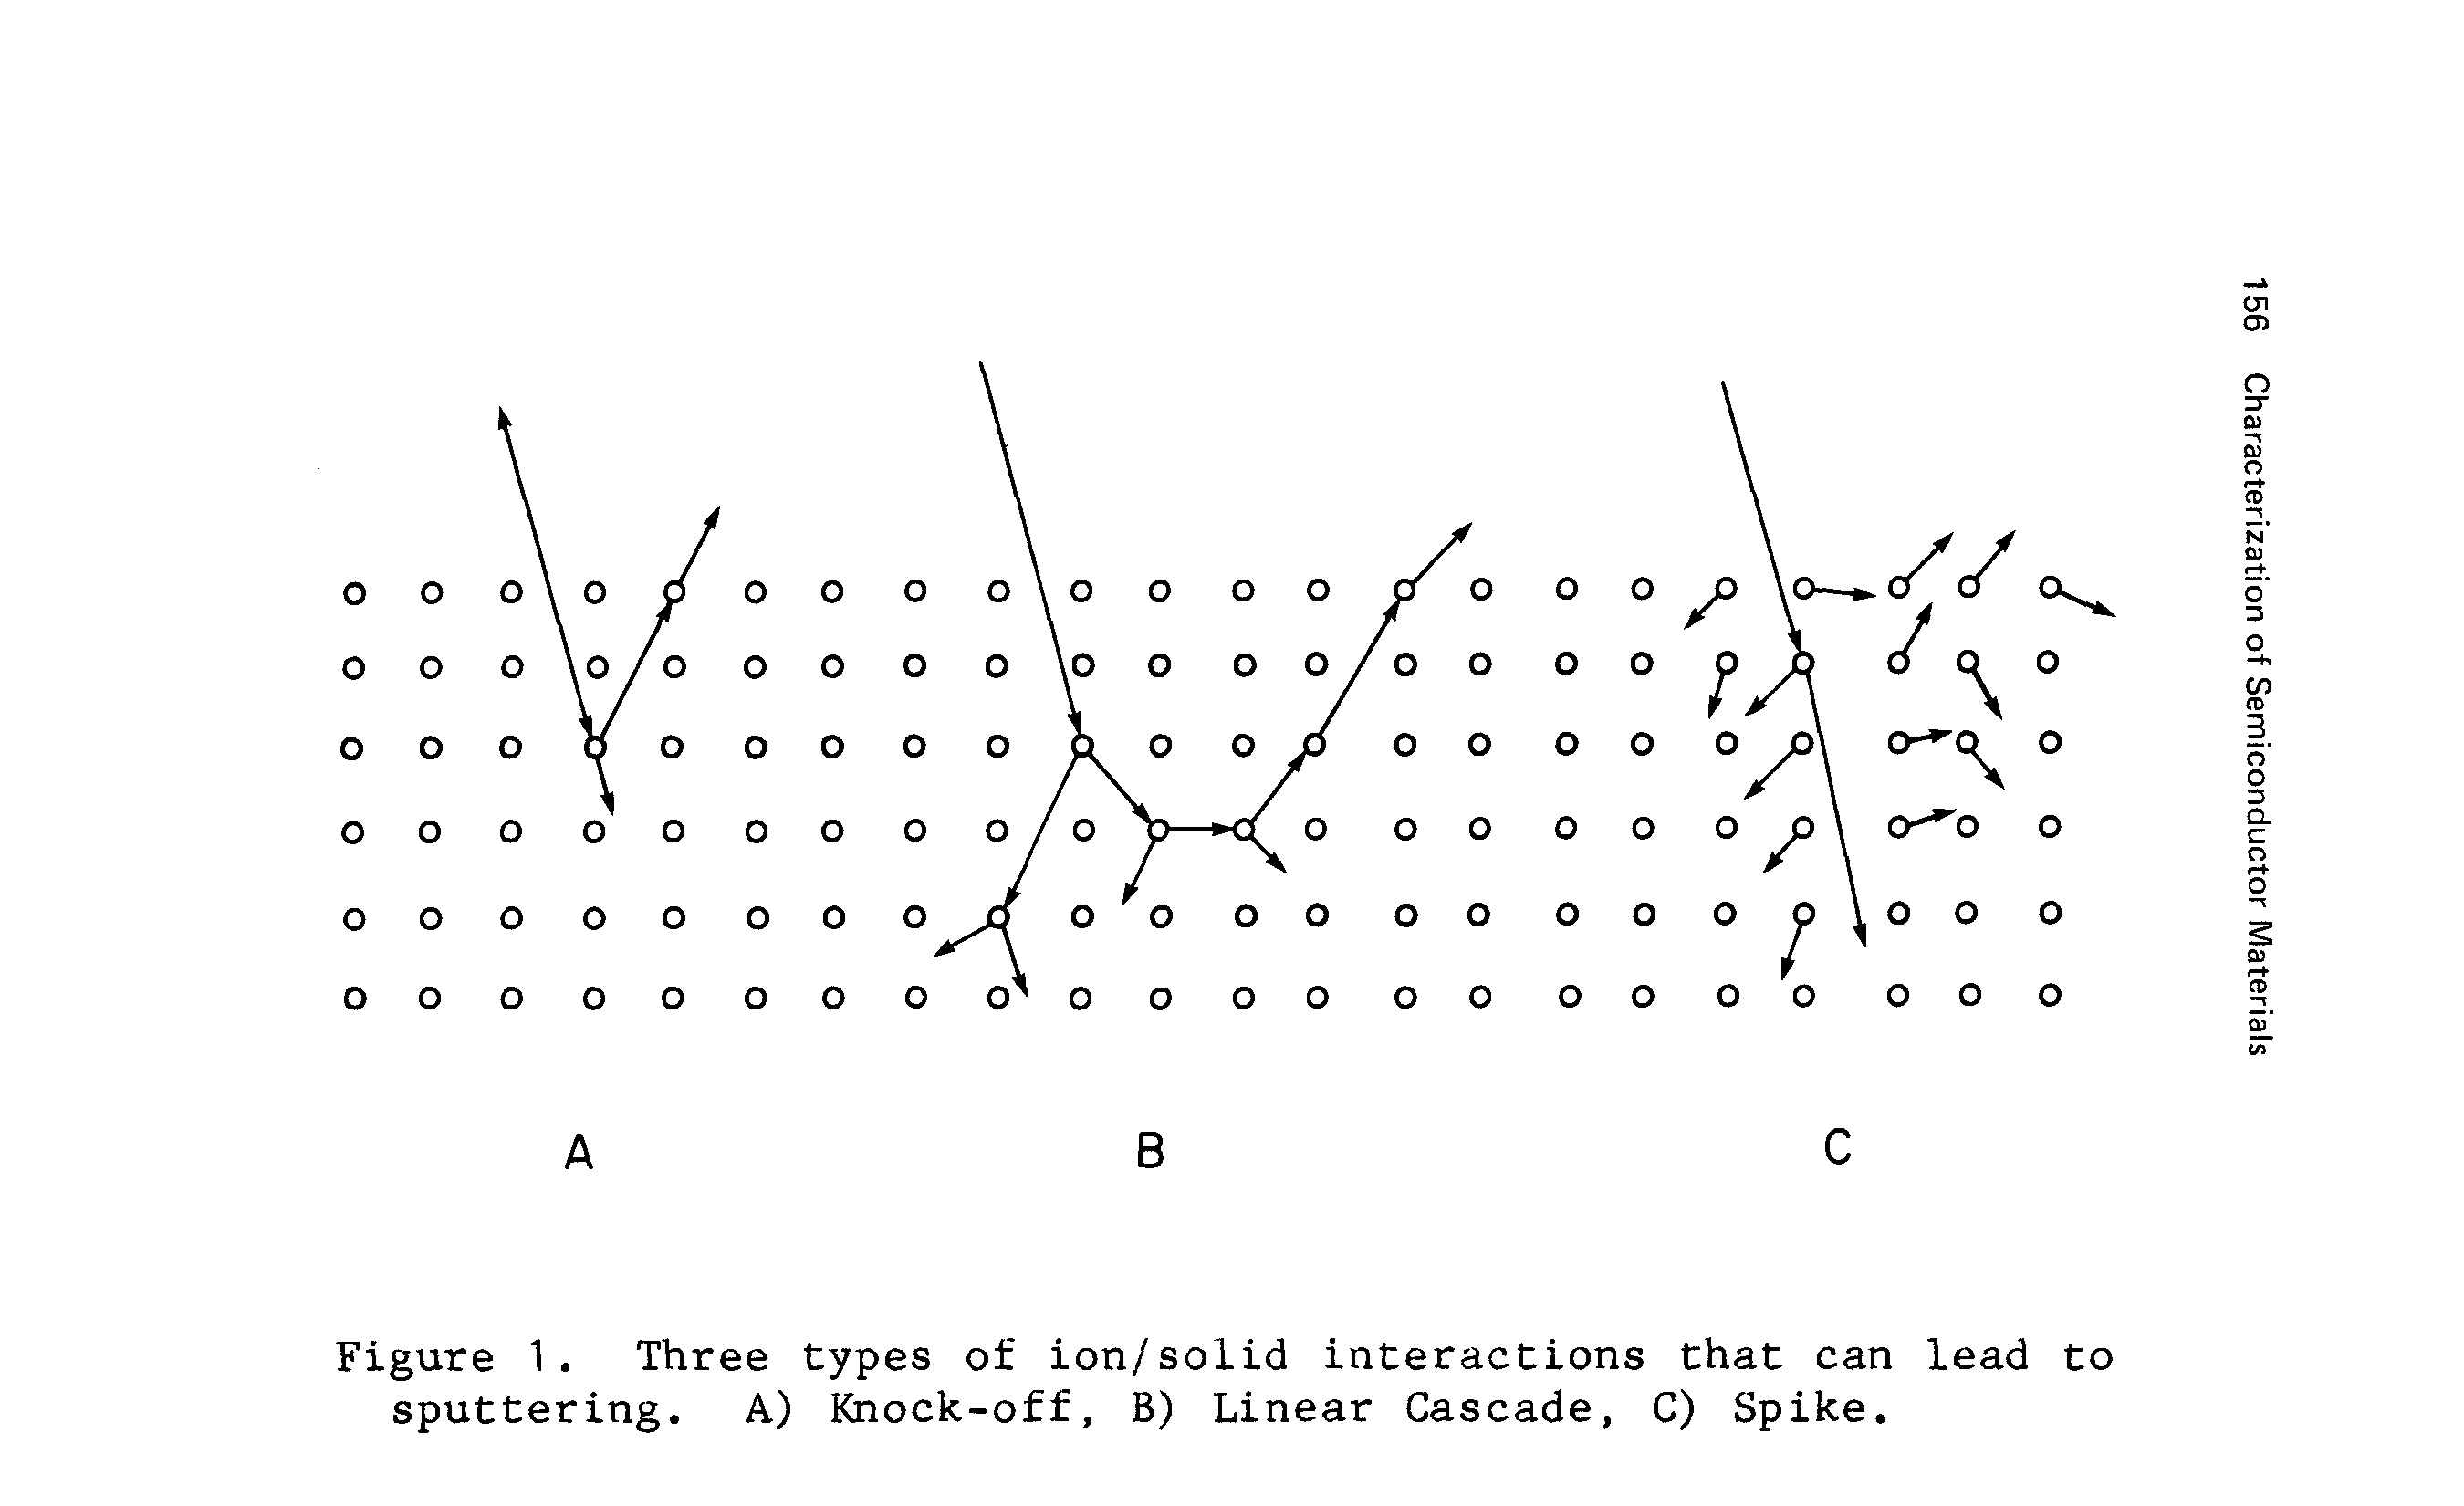 Figure 1. Three types of ion/solid interactions that can lead to sputtering. A) Knock-off, B) Linear Cascade, C) Spike.